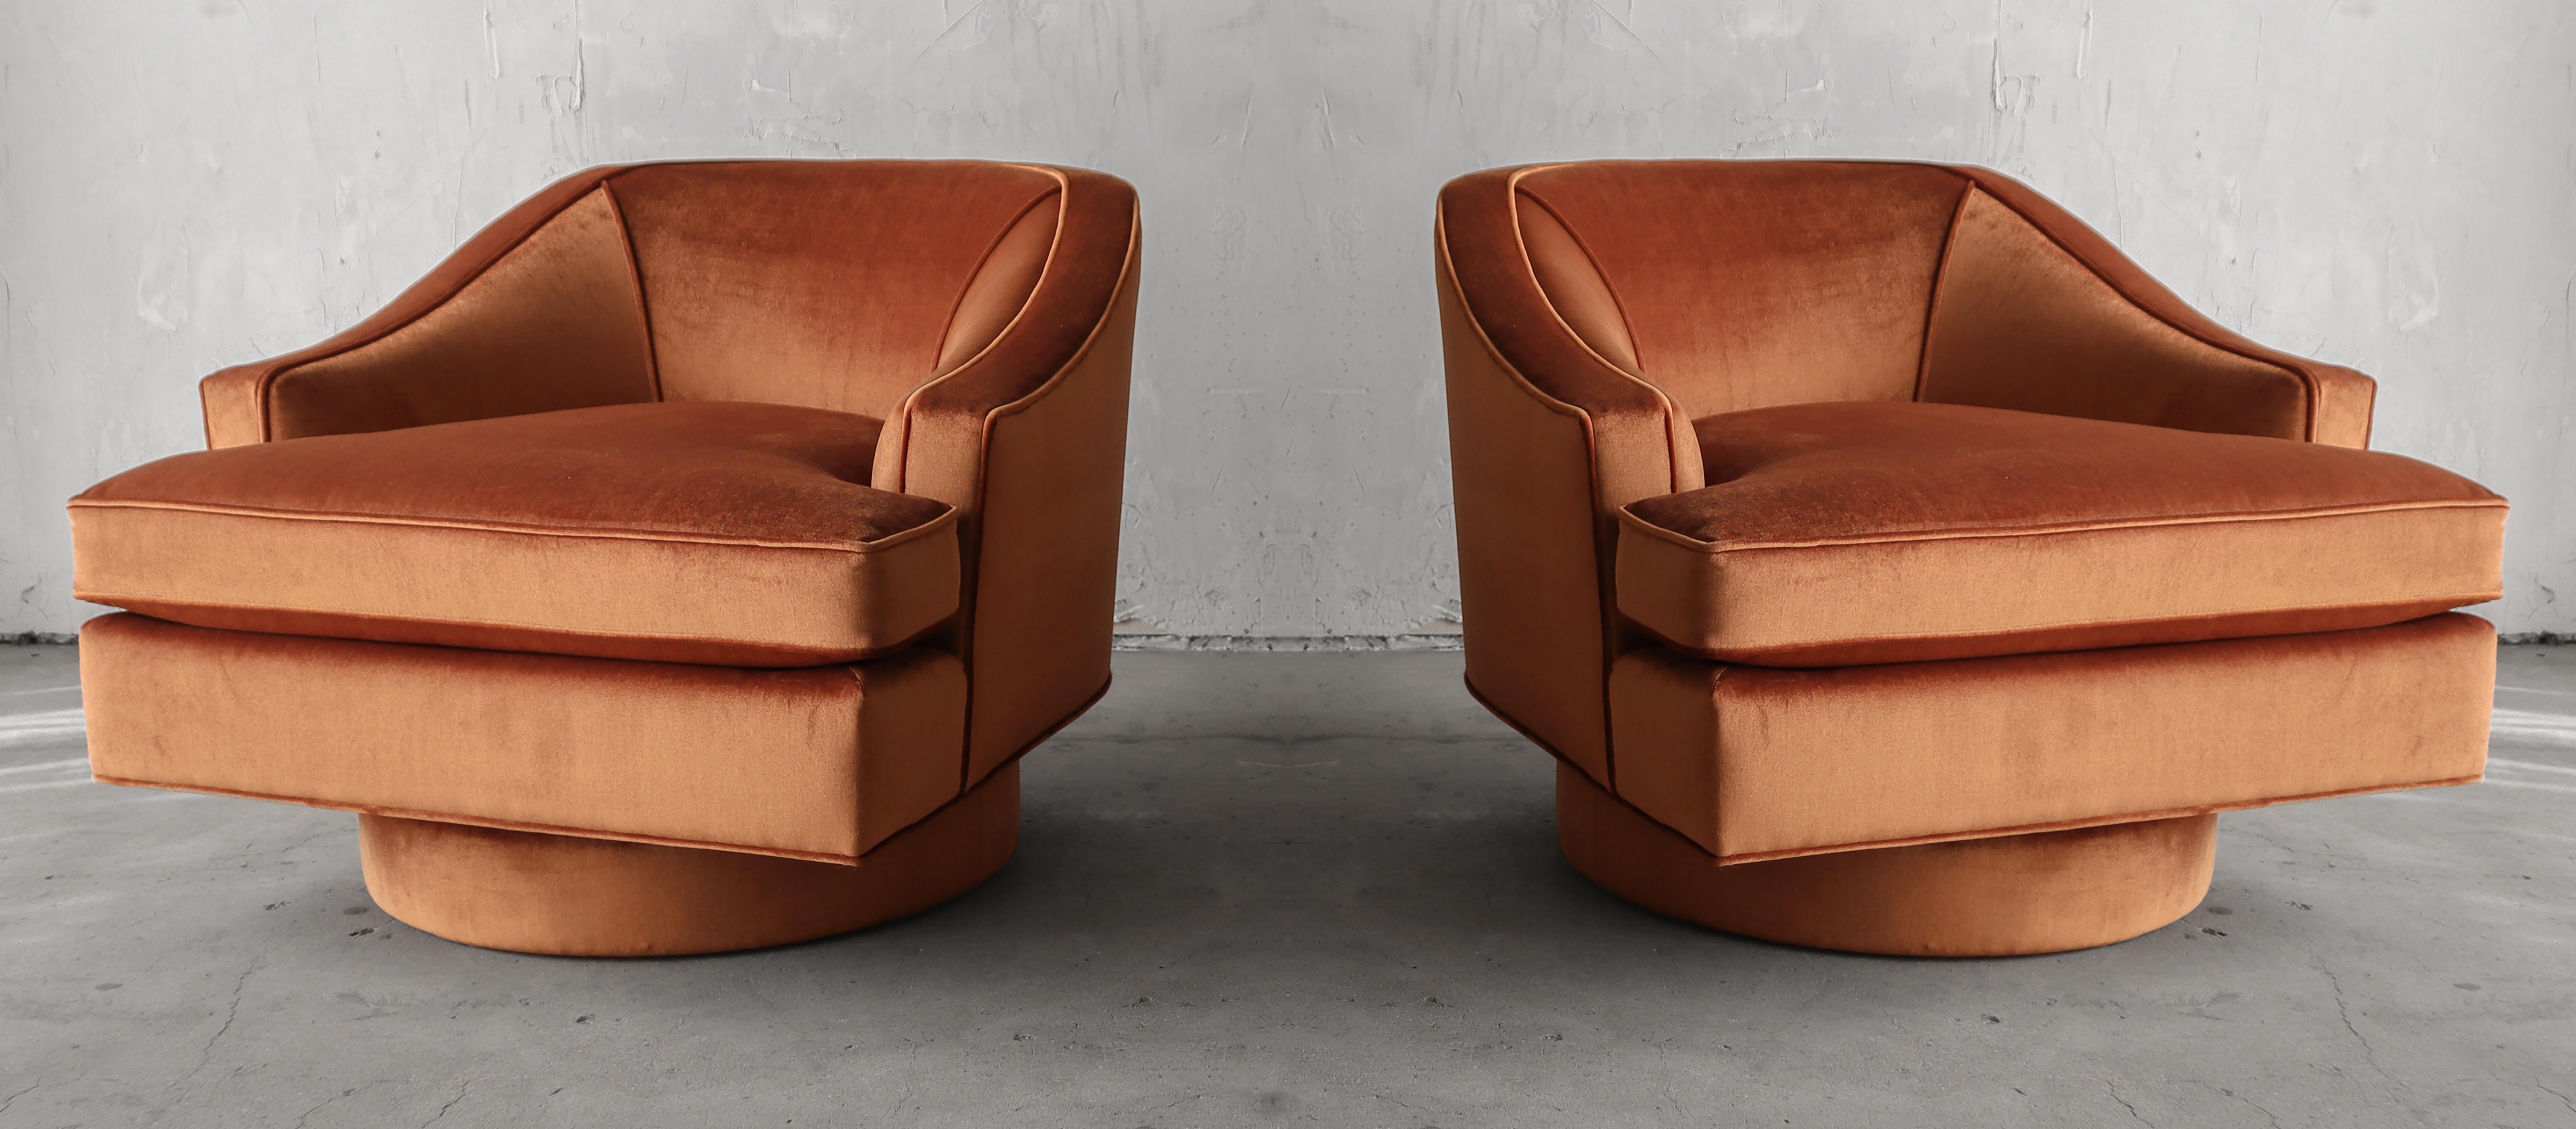 This is a beautiful pair of midcentury barrel back swivel chairs with large plinth bases. This pair has beautiful lines that can be appreciated from almost any angle. 

The chairs have been professionally restored, they are installation ready.